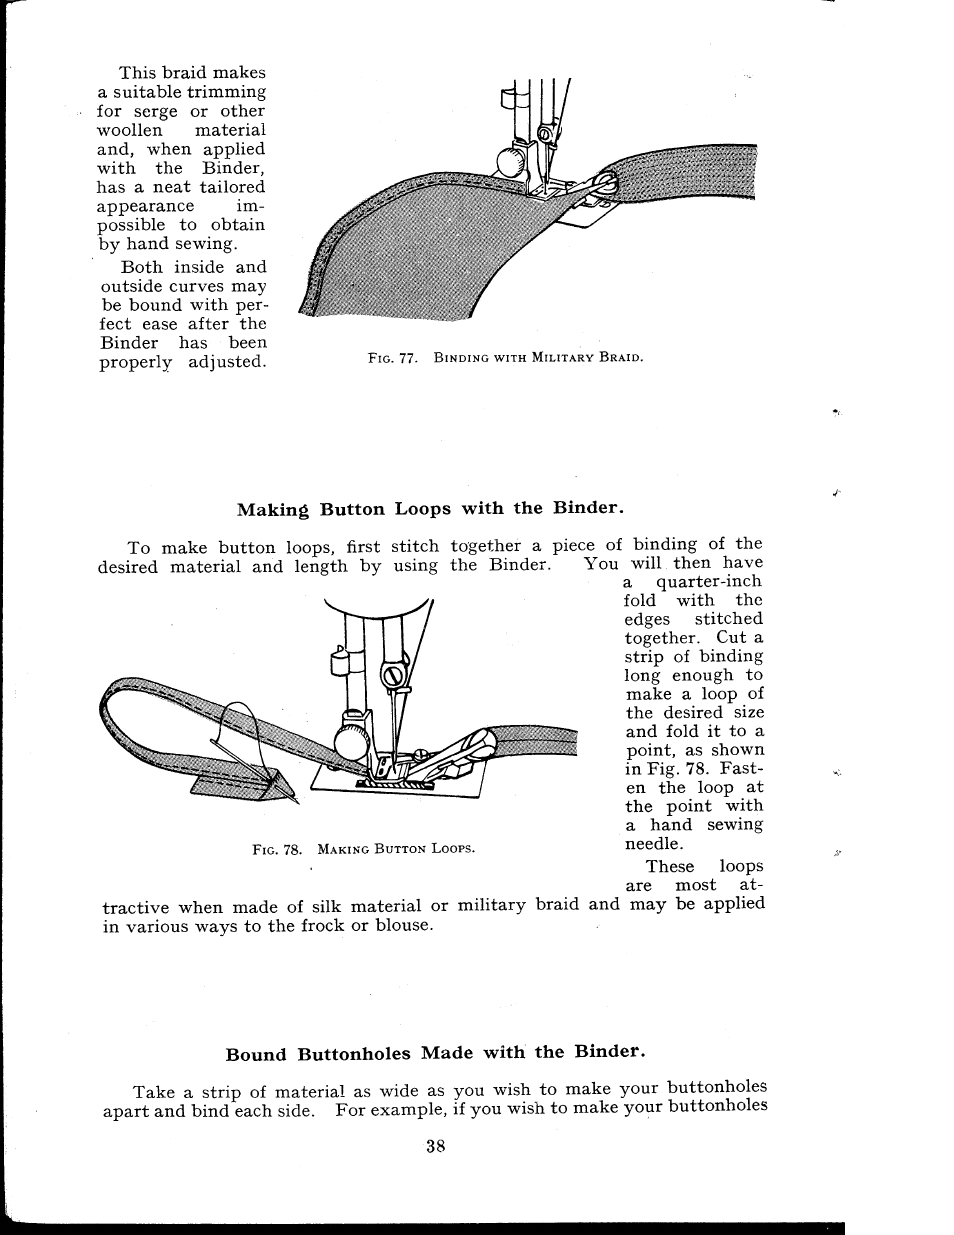 Making button loops with the binder, Bound buttonholes made with the binder | SINGER 404K User Manual | Page 38 / 78